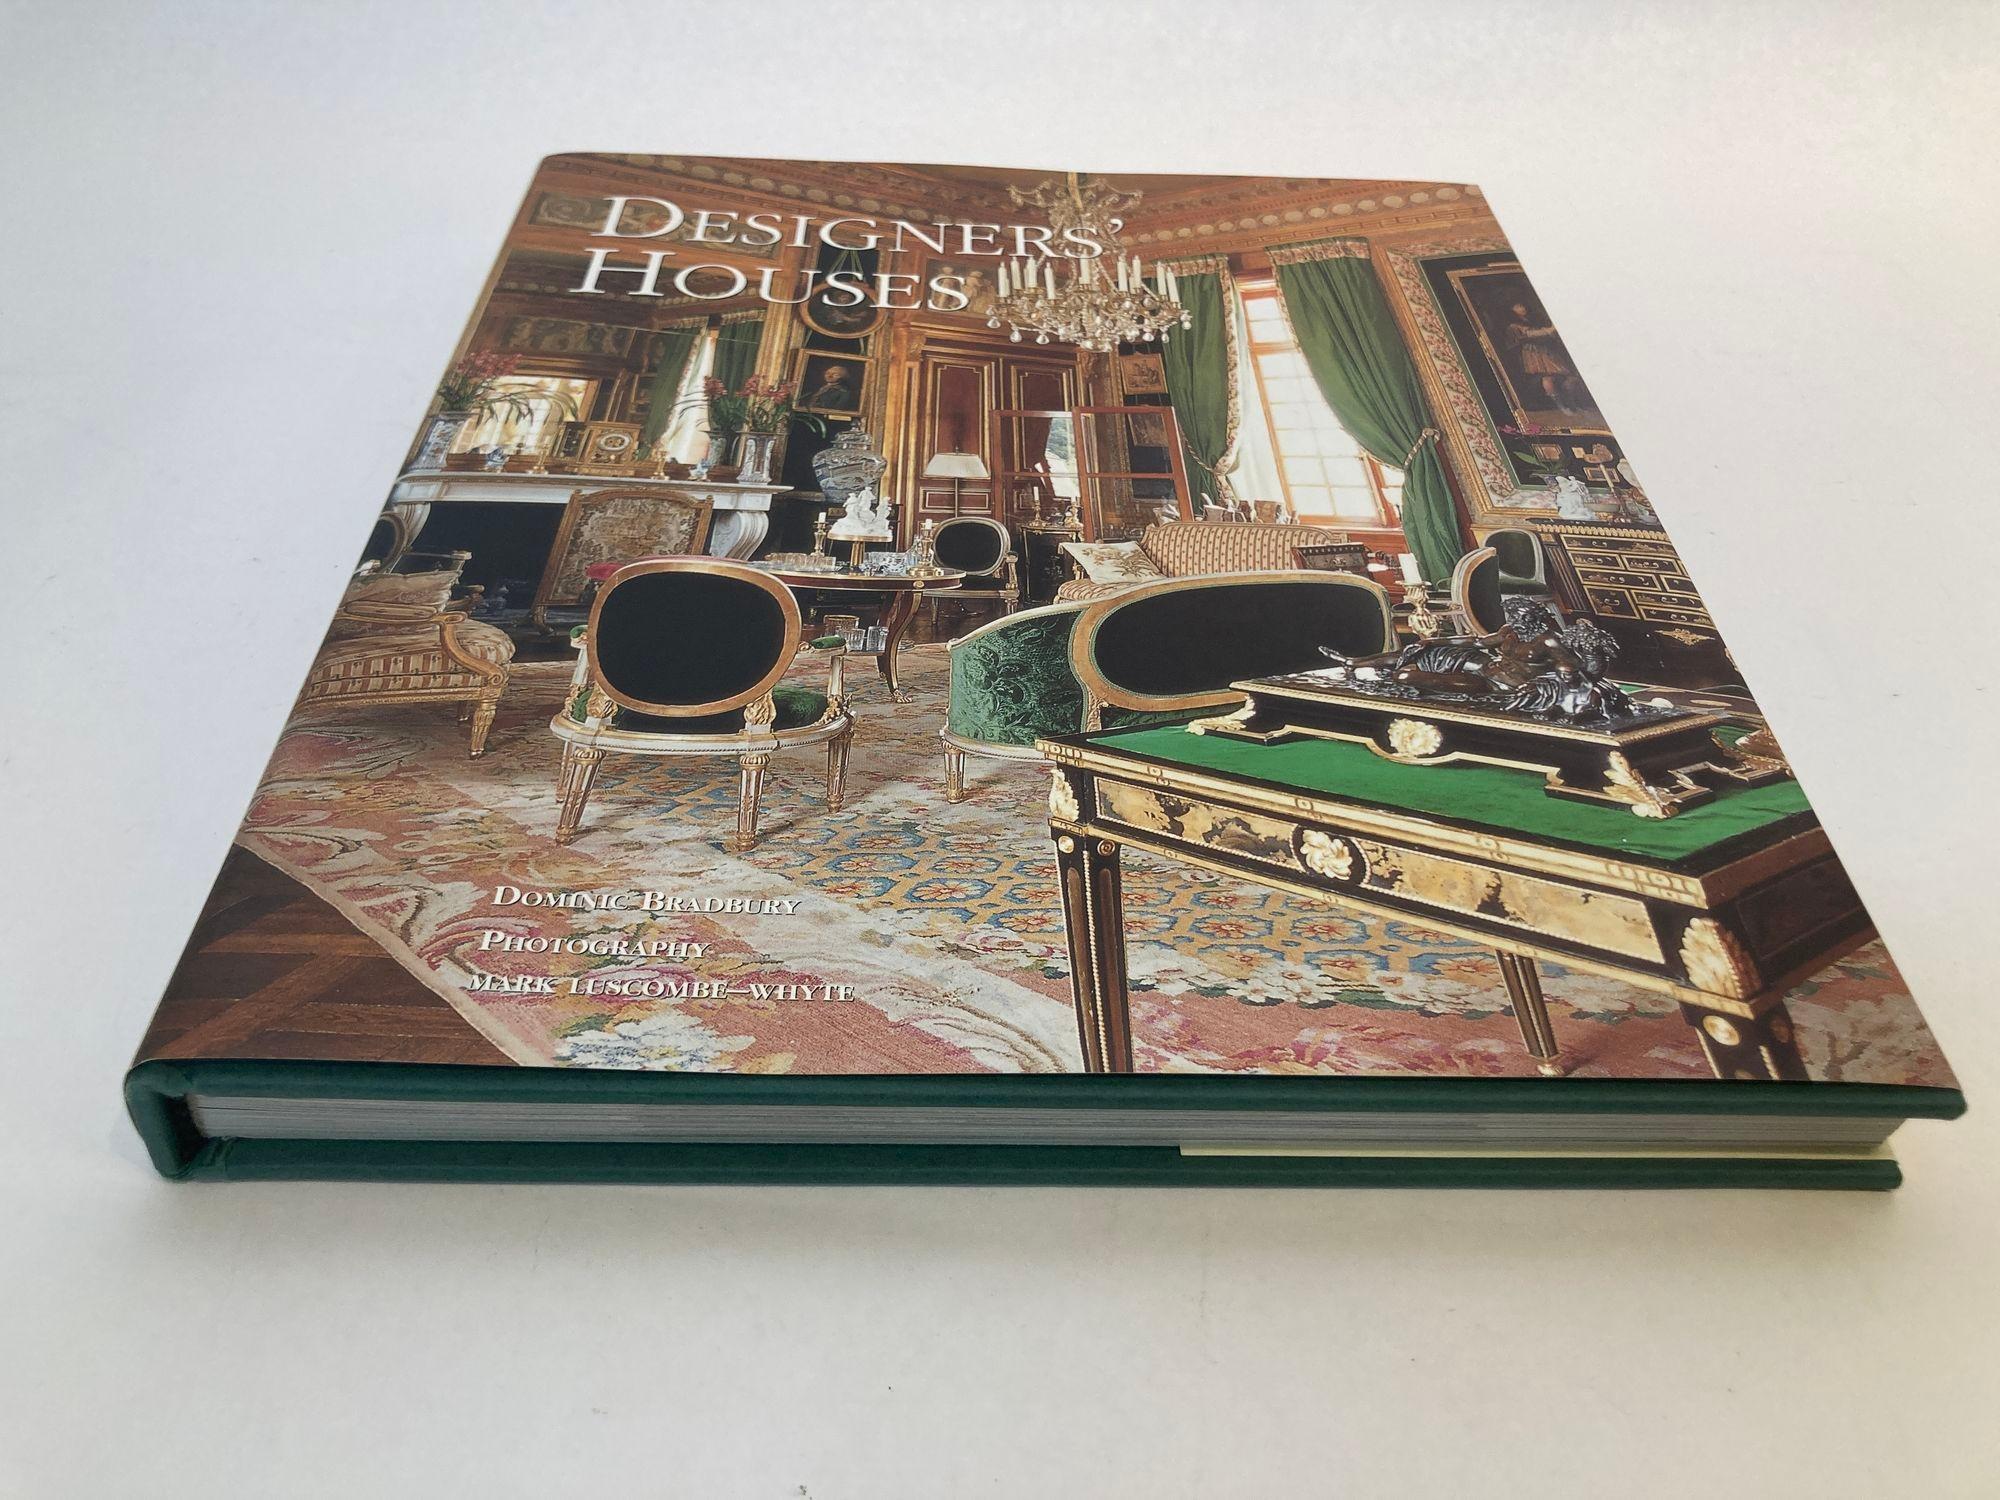 Designers' Houses Hardcover book First Edition By Dominic Bradbury 2001 For Sale 1